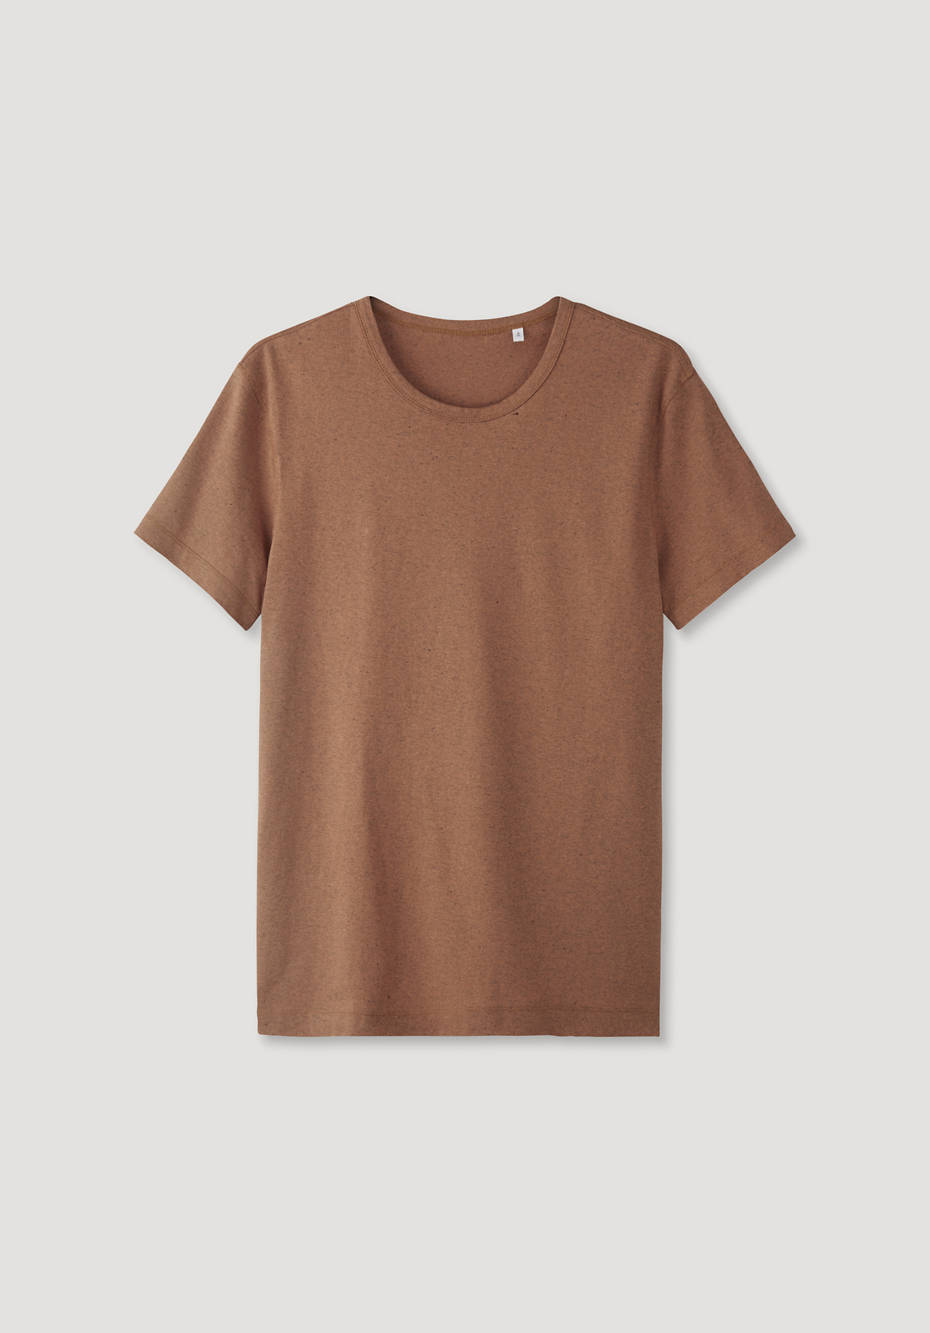 BetterRecycling T-shirt made from pure organic cotton